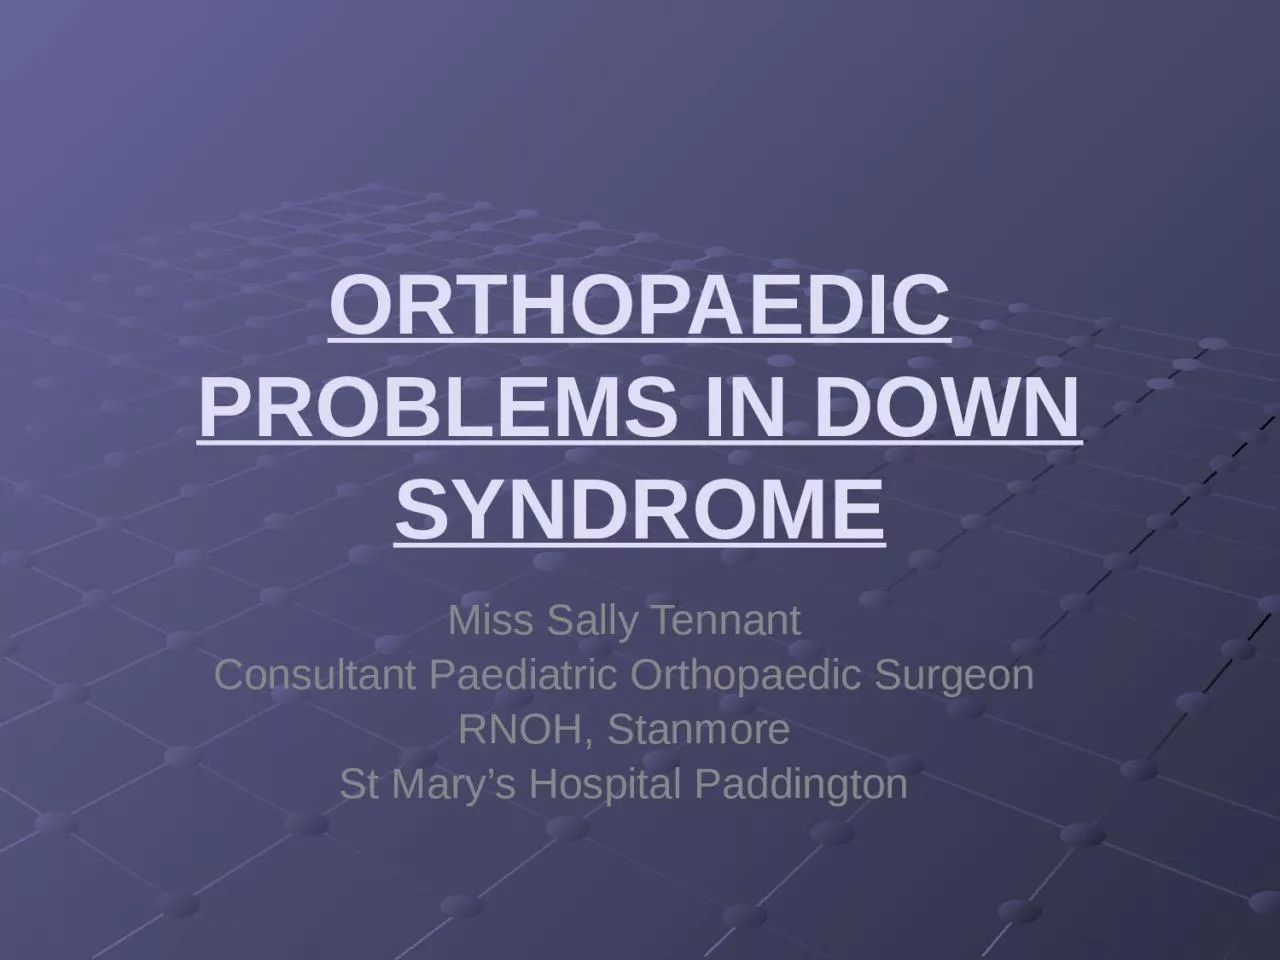 ORTHOPAEDIC PROBLEMS IN DOWN SYNDROME